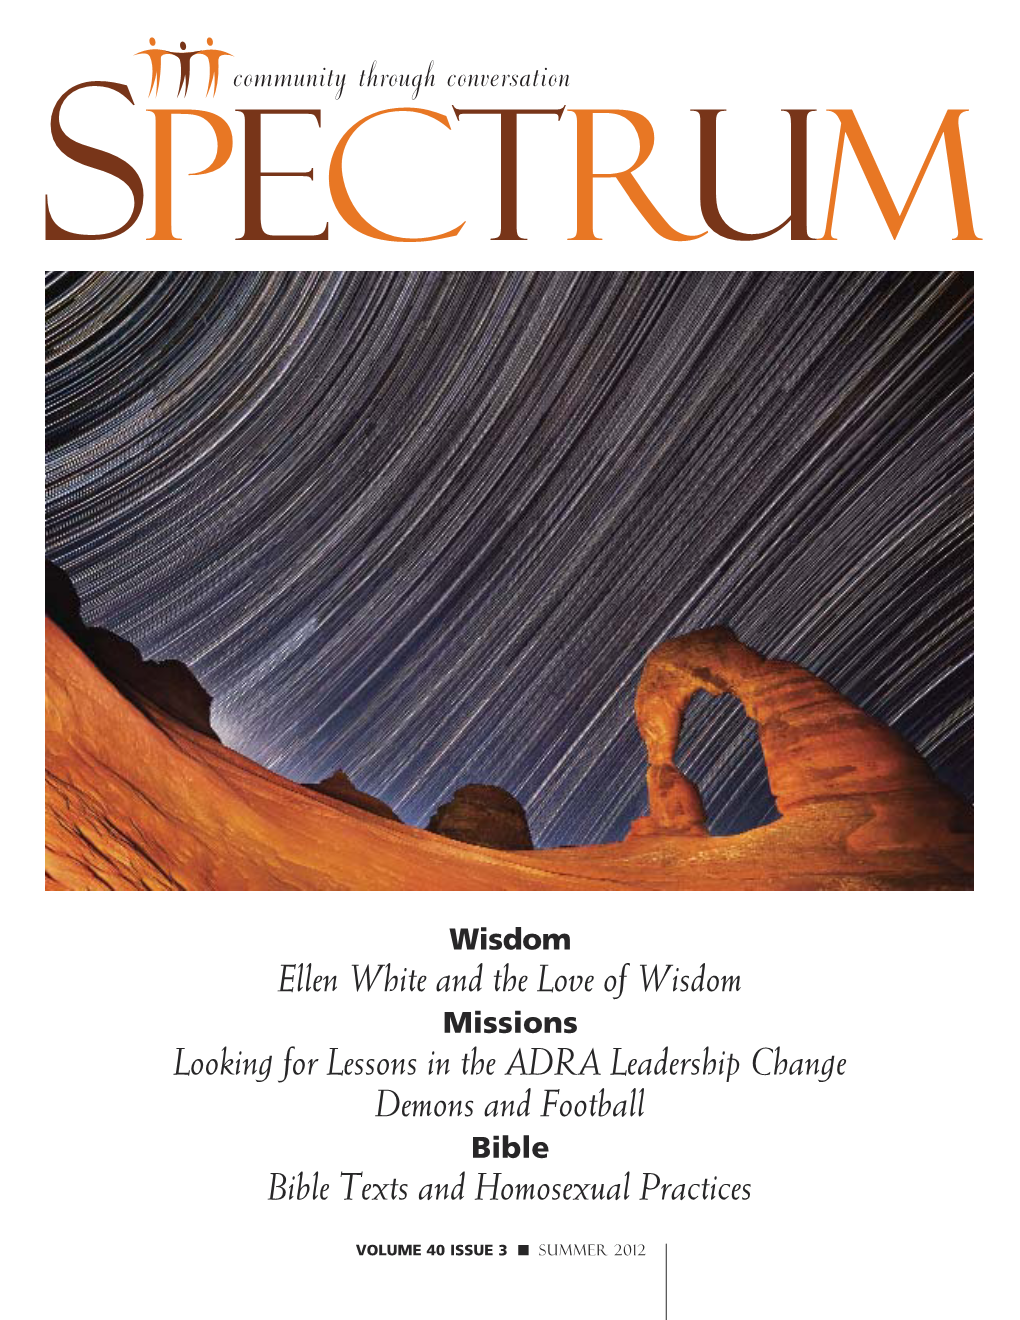 Ellen White and the Love of Wisdom Looking for Lessons in the ADRA